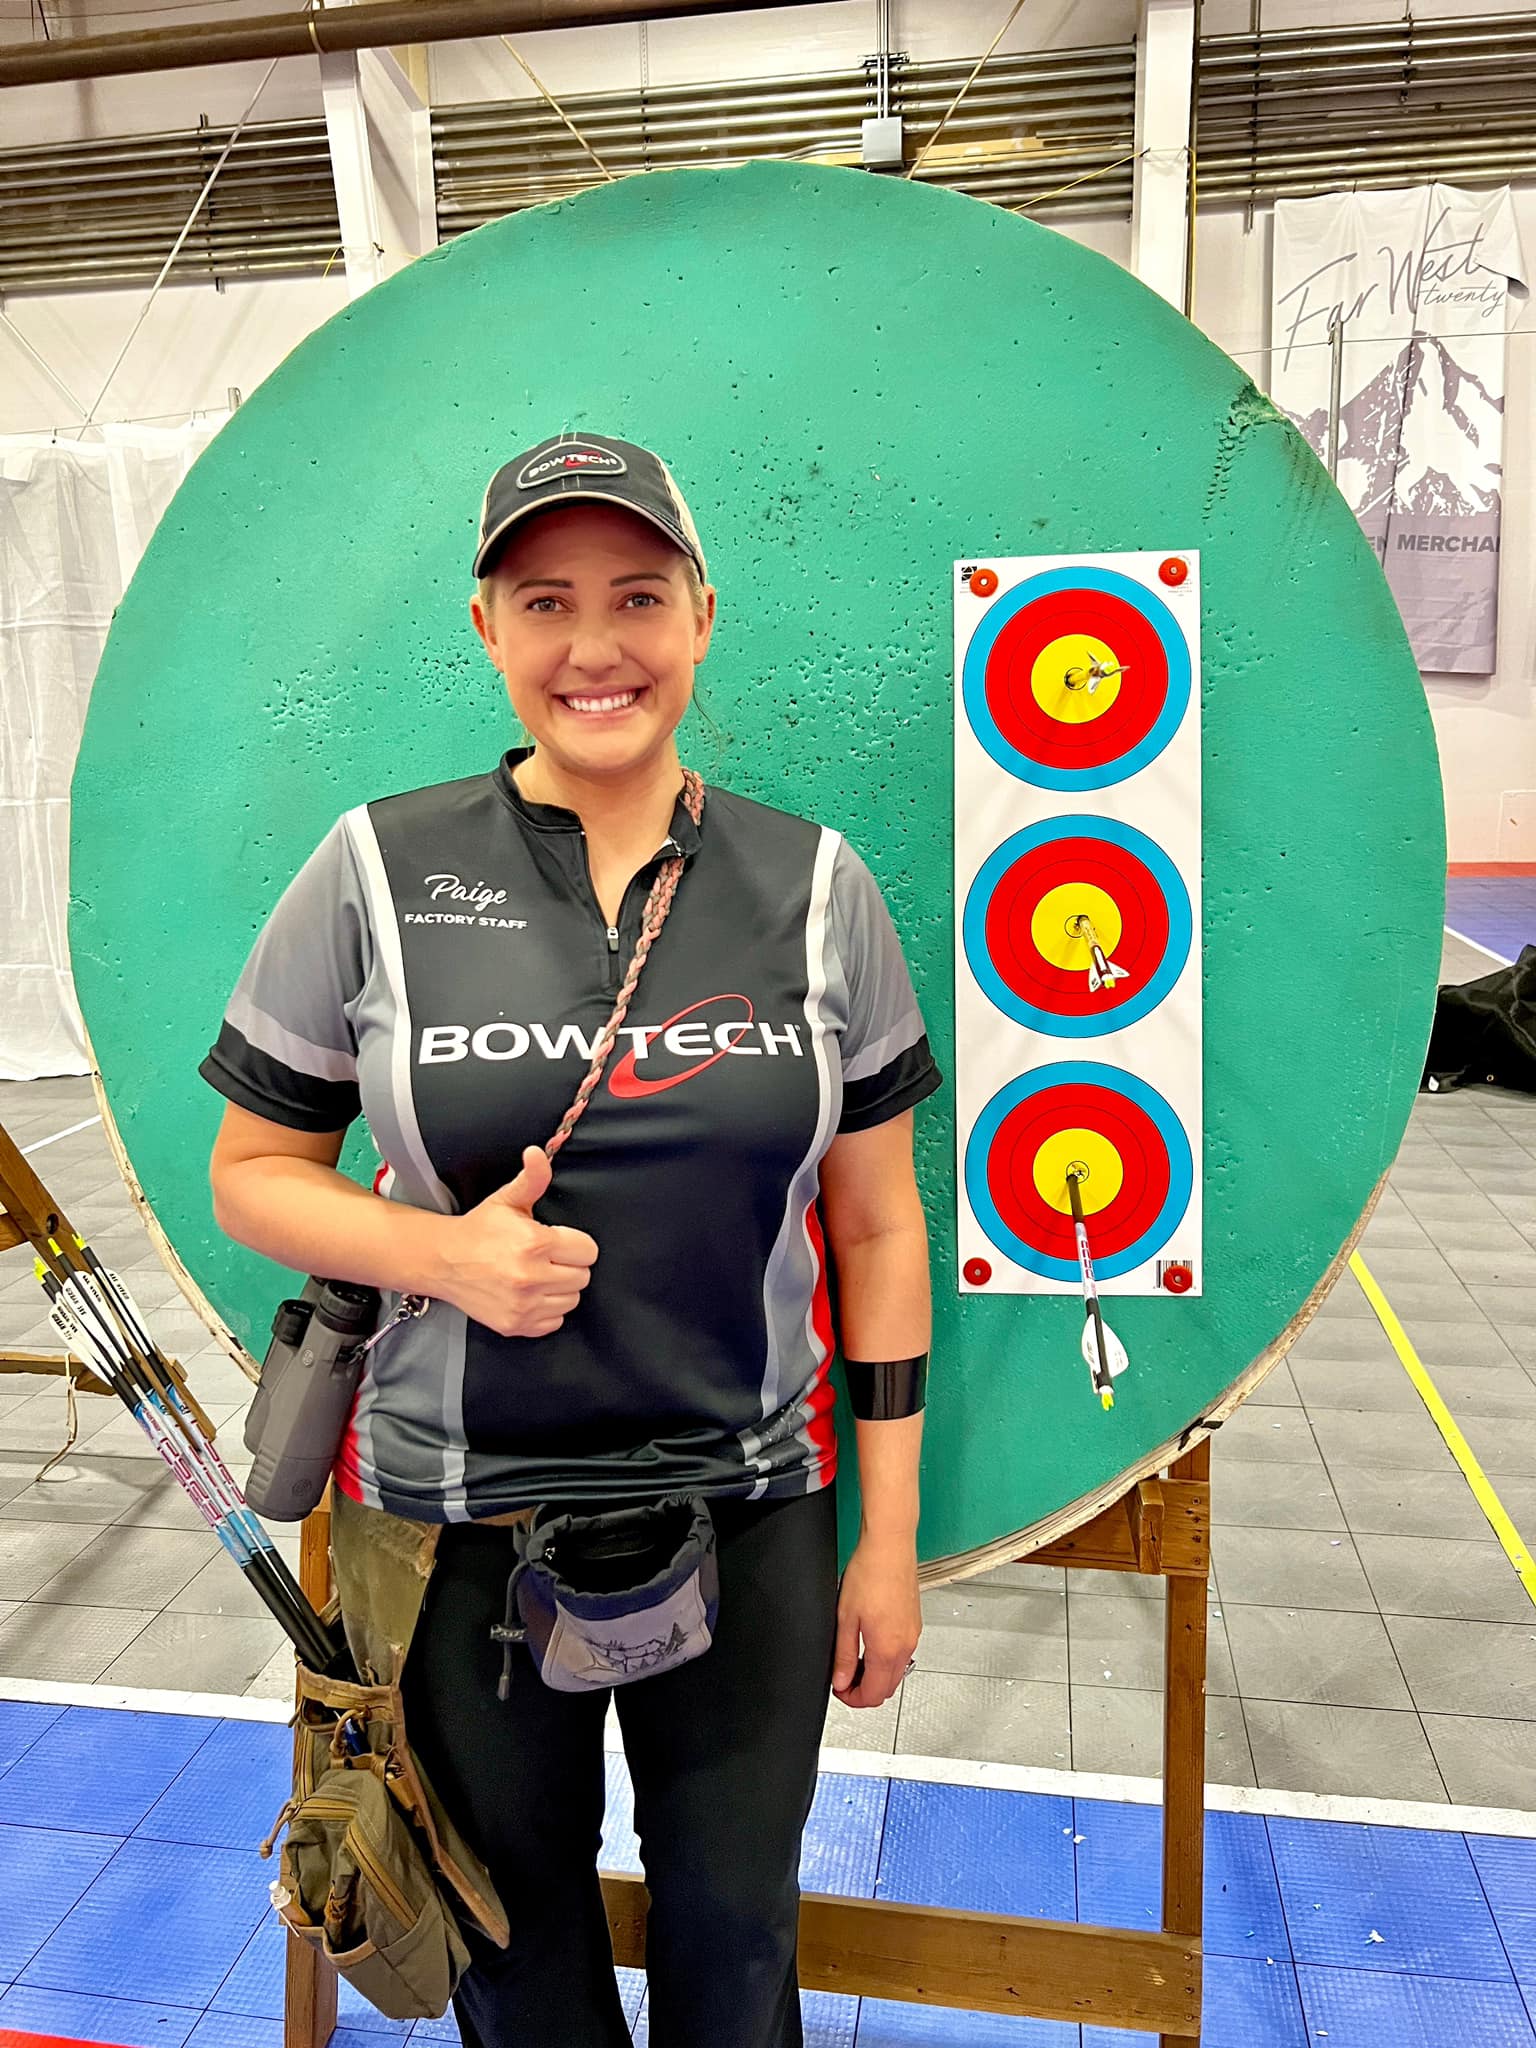 Paige Pearce Sets New Record at USA Indoor Archery Nationals